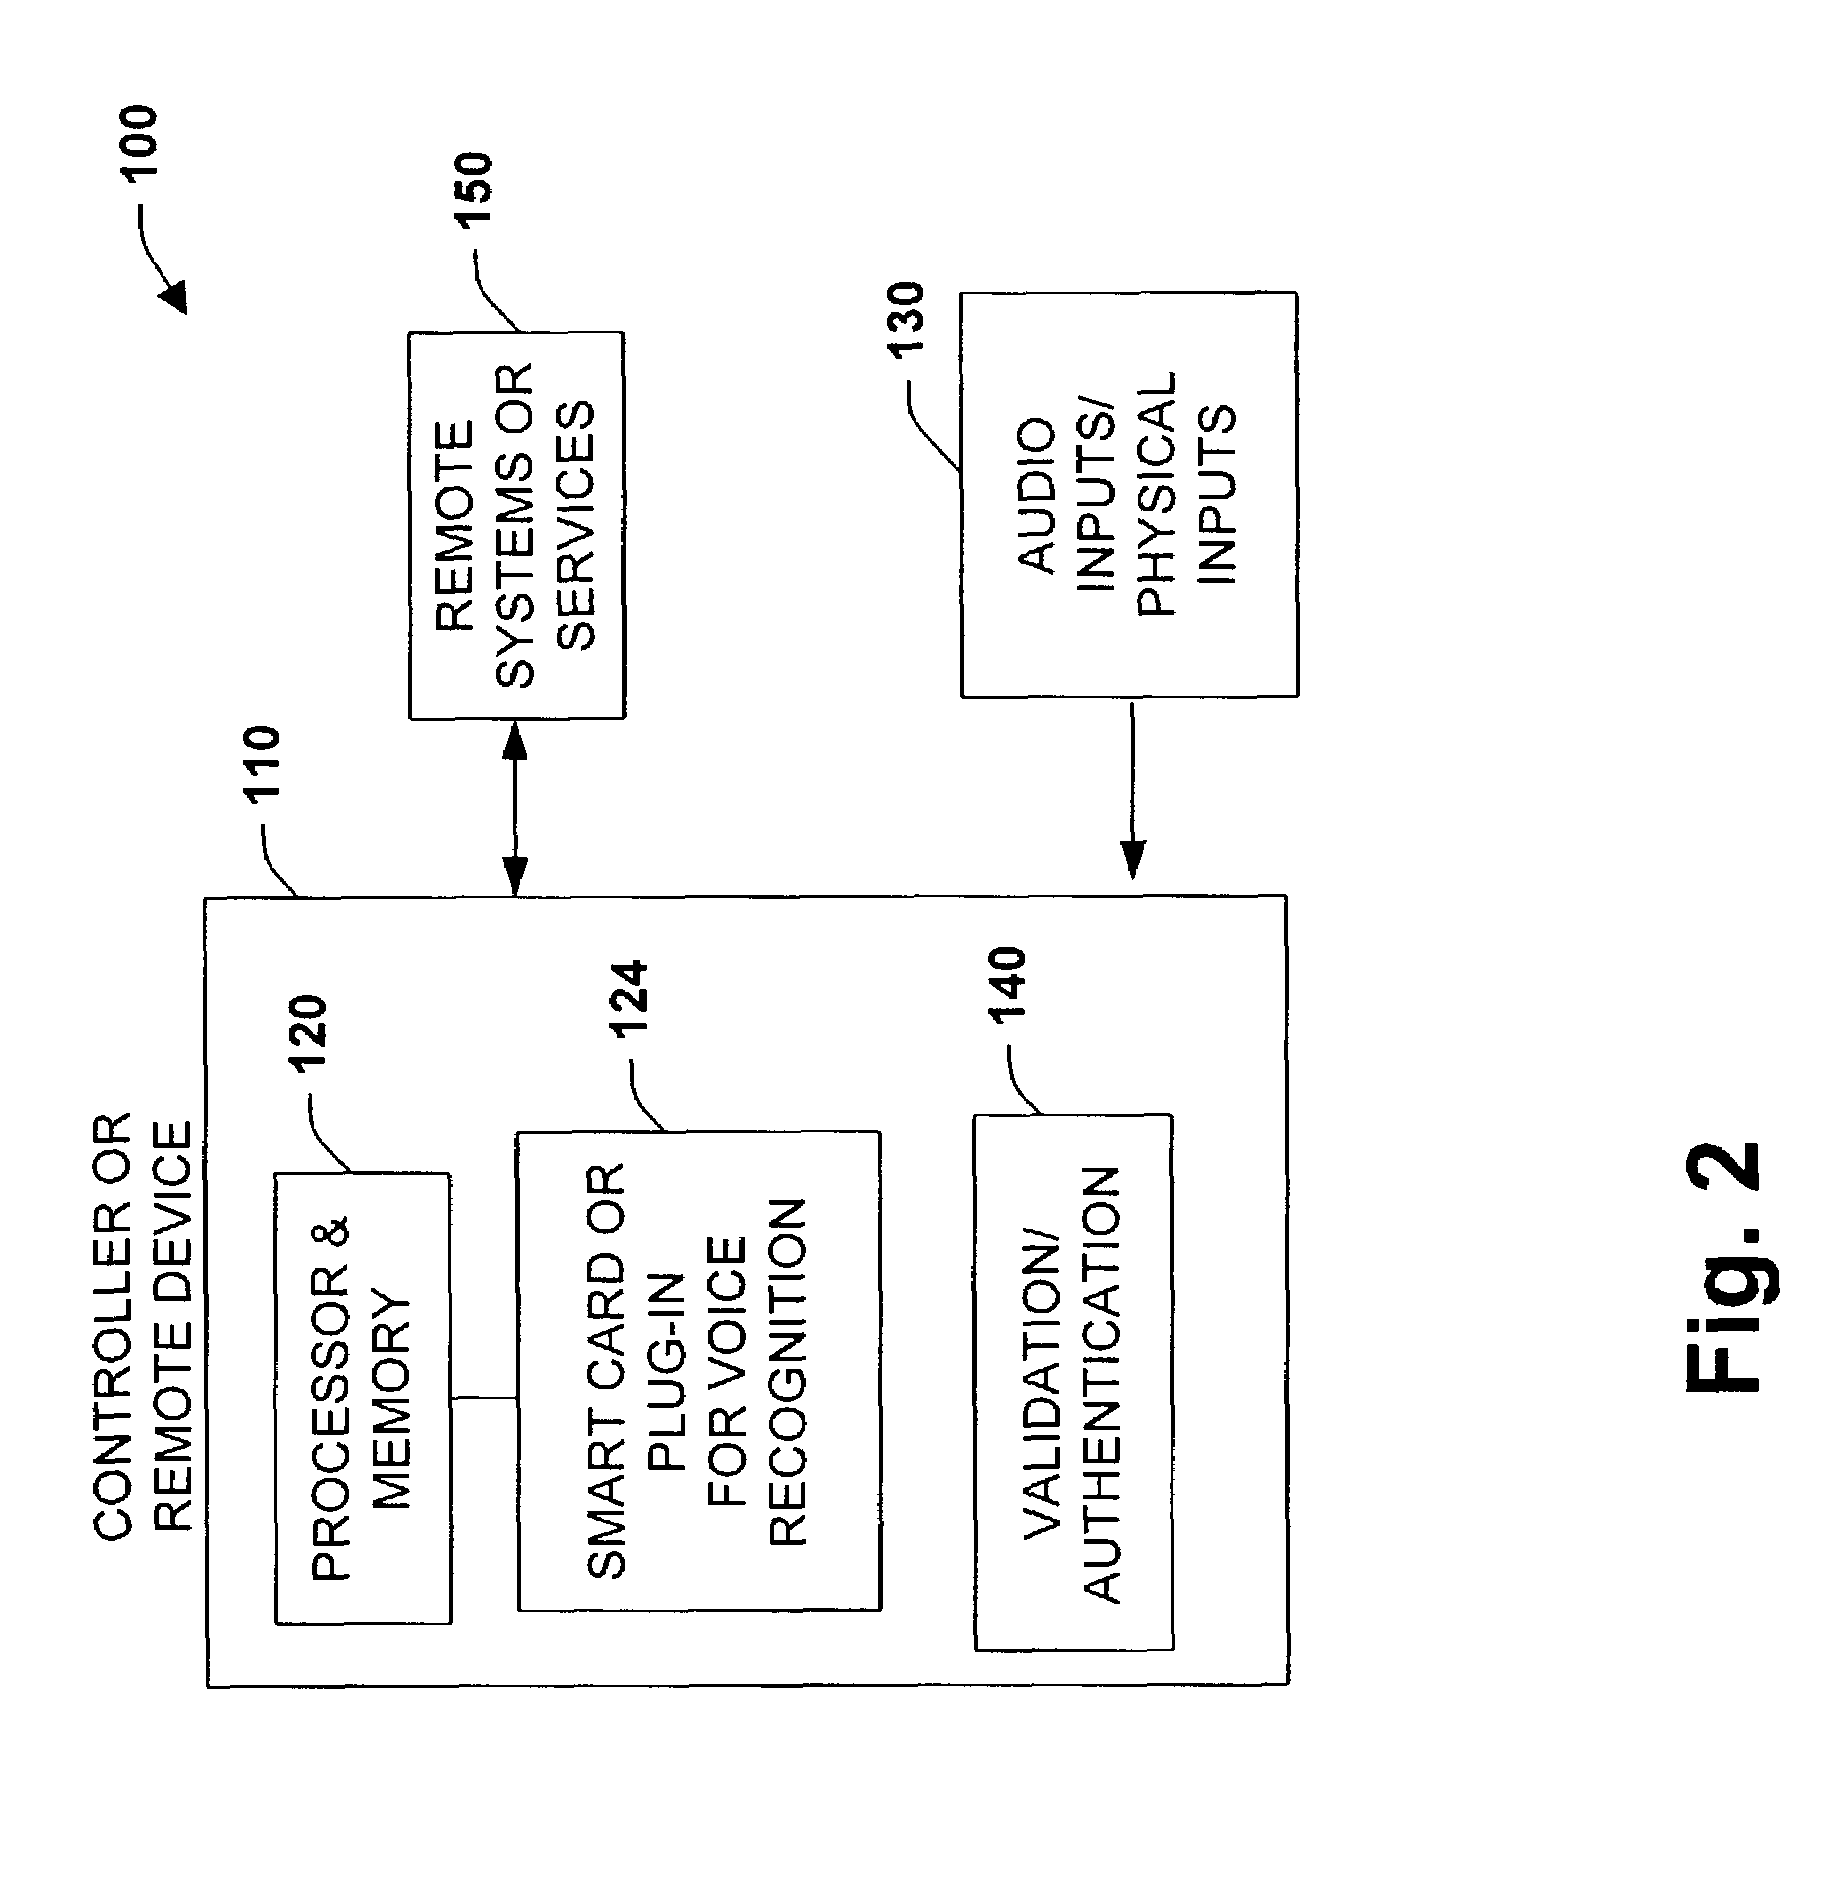 System and methodology providing adaptive interface in an industrial controller environment